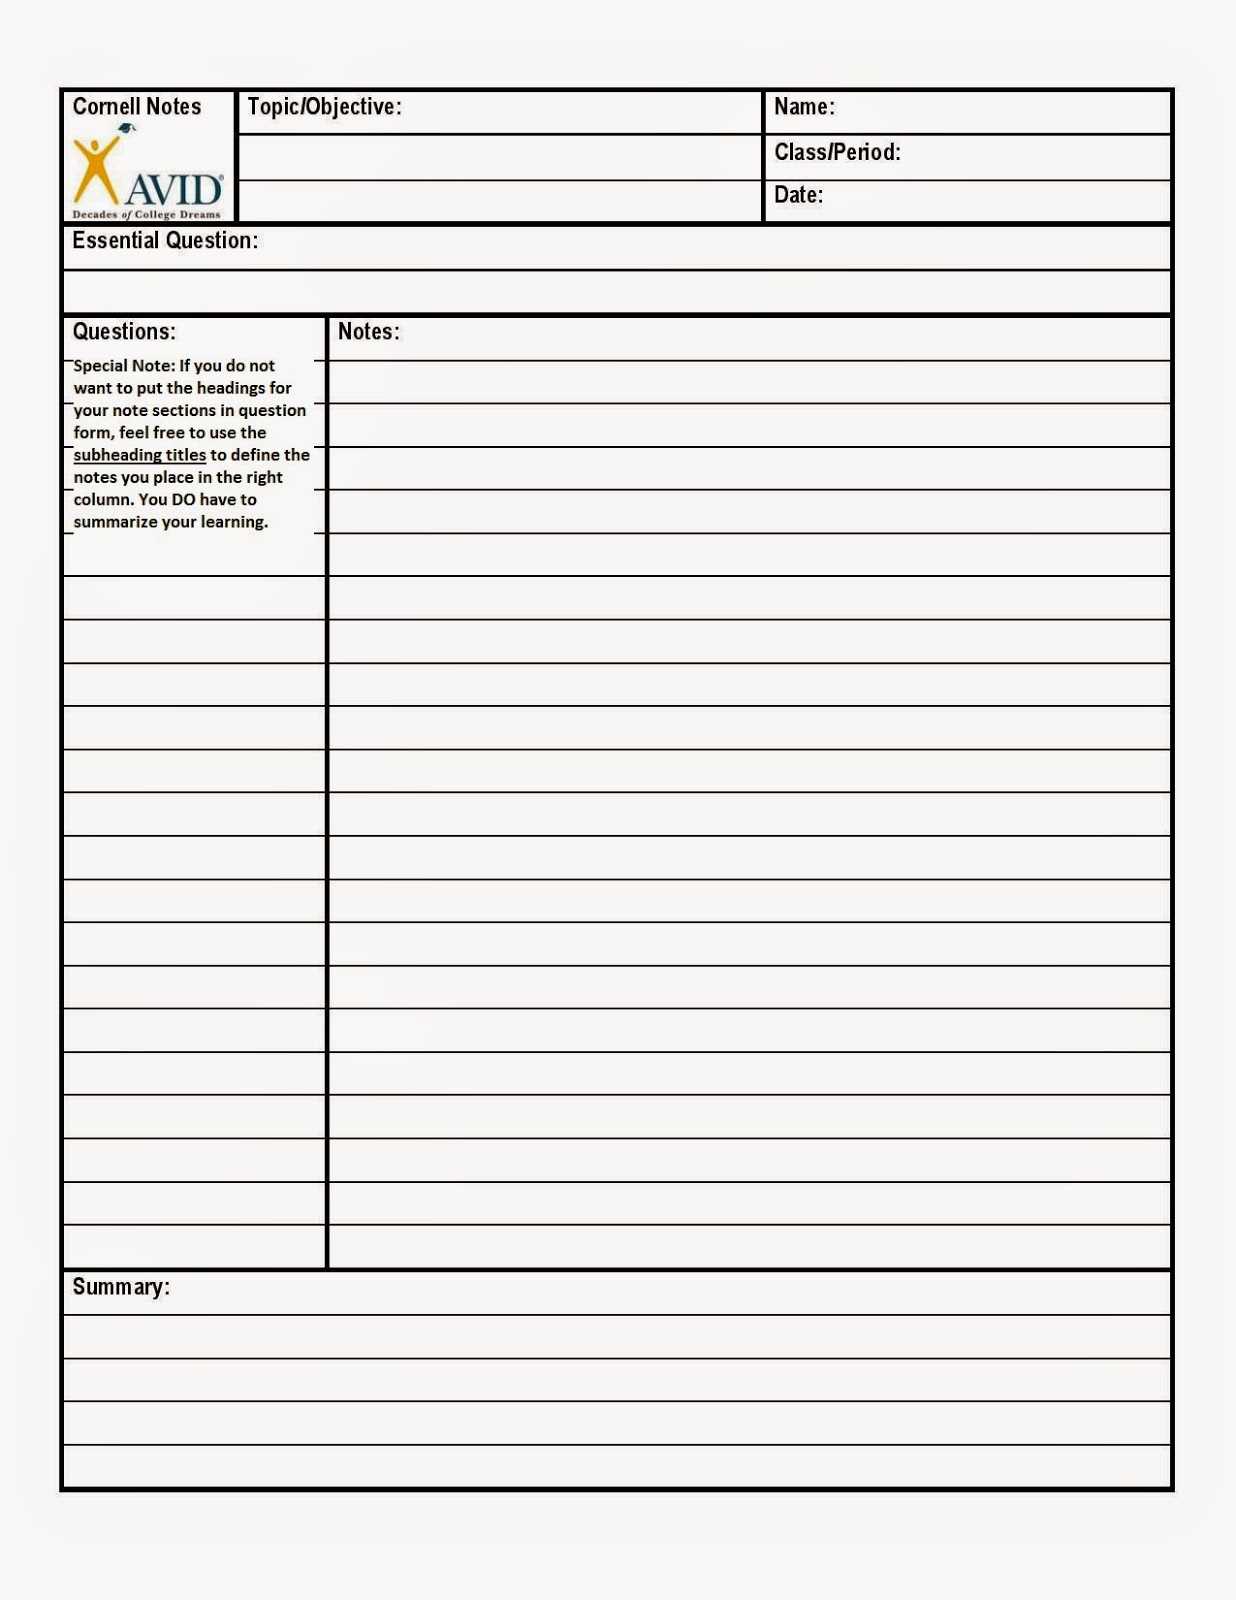 Rloacs English I Honors, Semester 2: Myths And Legends In Cornell Notes Template Word Document